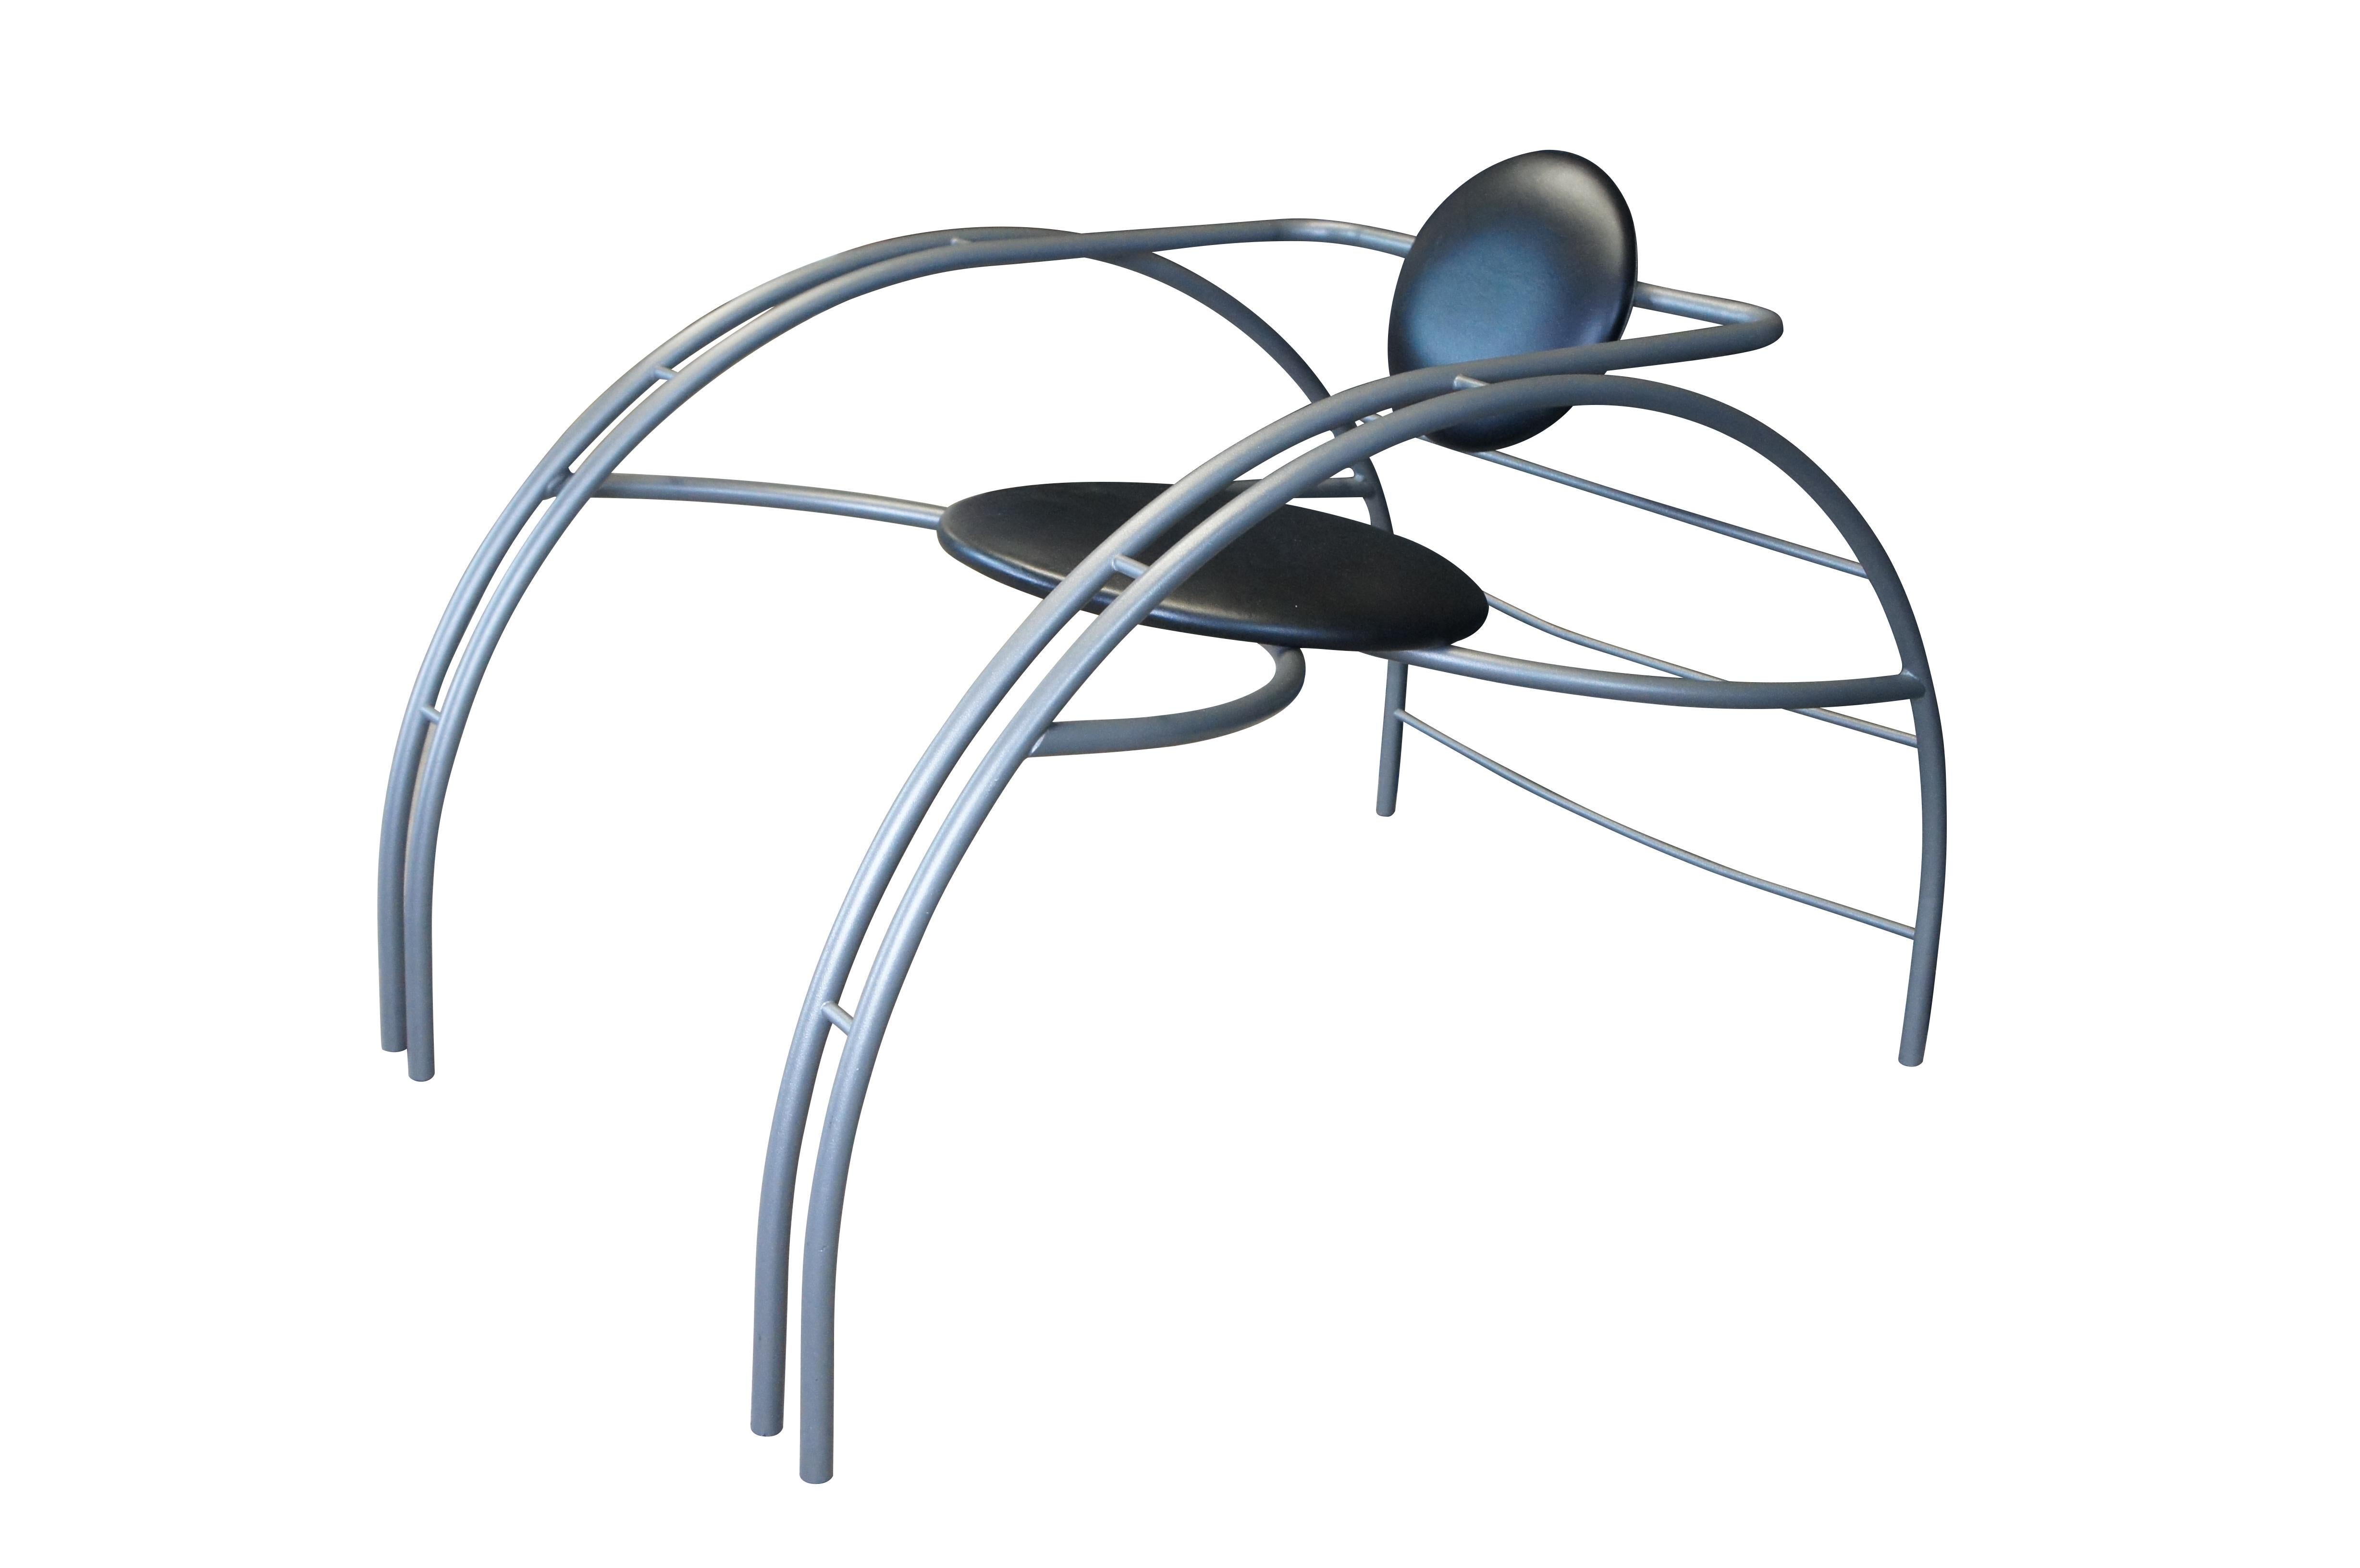 Post-Modern Post Modern Quebec 69 Tubular Sculptural Spider Chair by Les Amisca 40